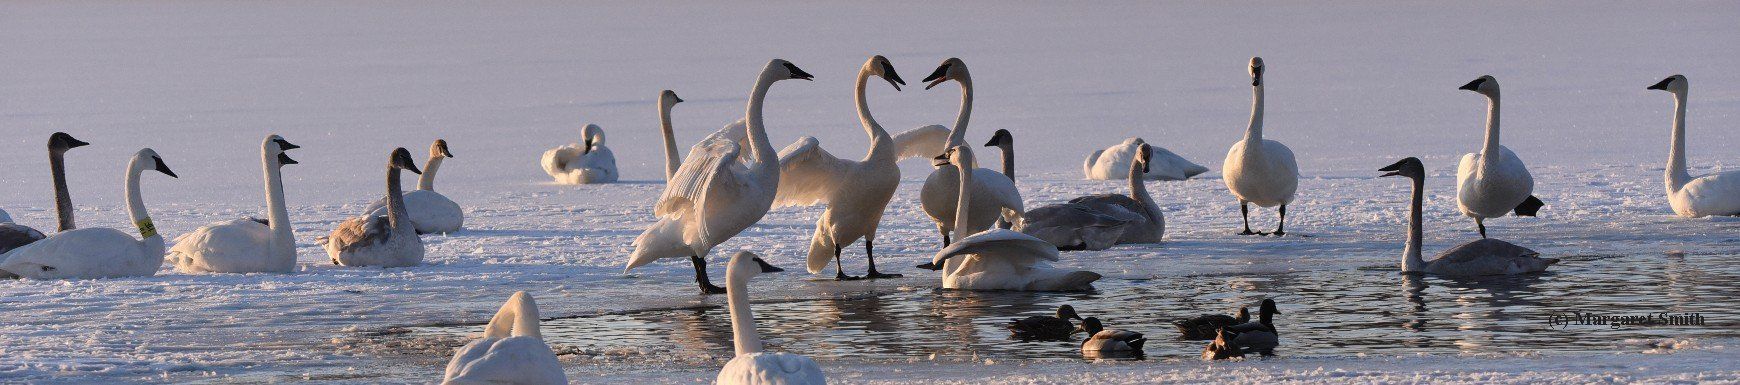 News about Trumpeter Swan issues, progress, events, and history are all found here